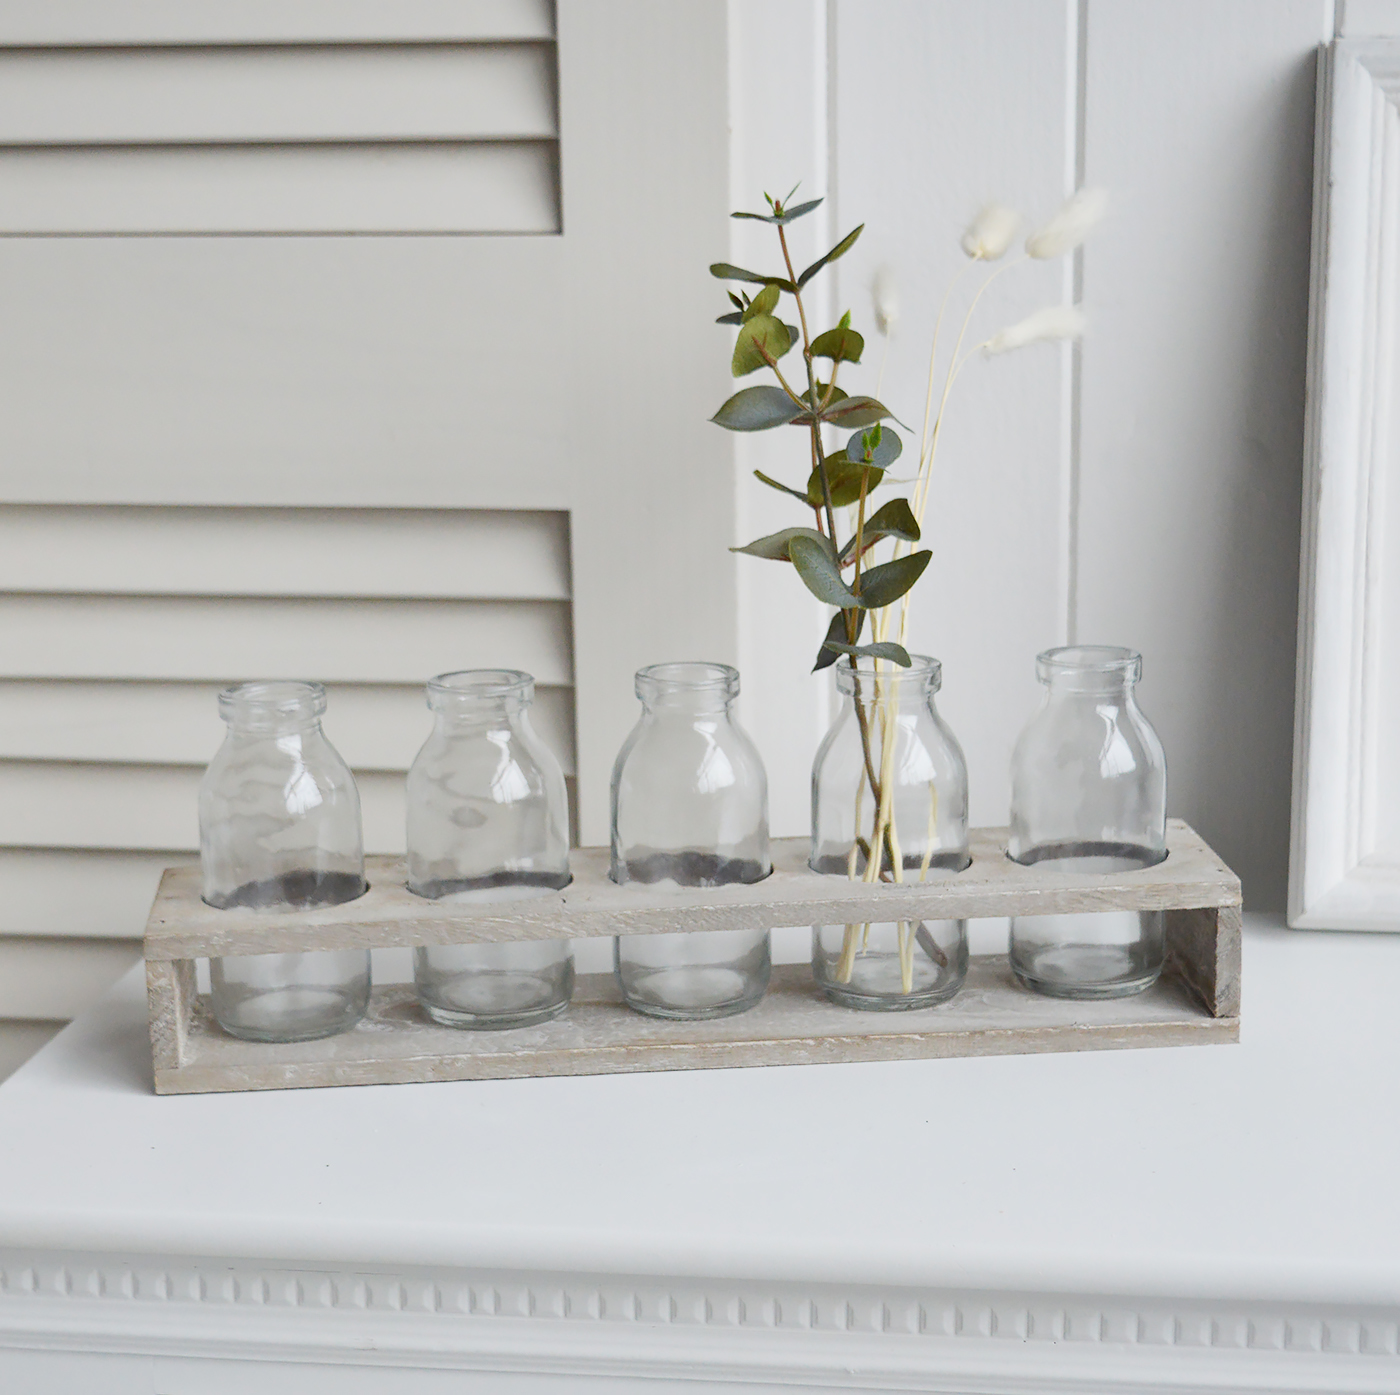 Newbury Small Glass Bud Vase in wooden Tray from The White Lighthouse coastal, New England and country furniture and home decor accessories UK